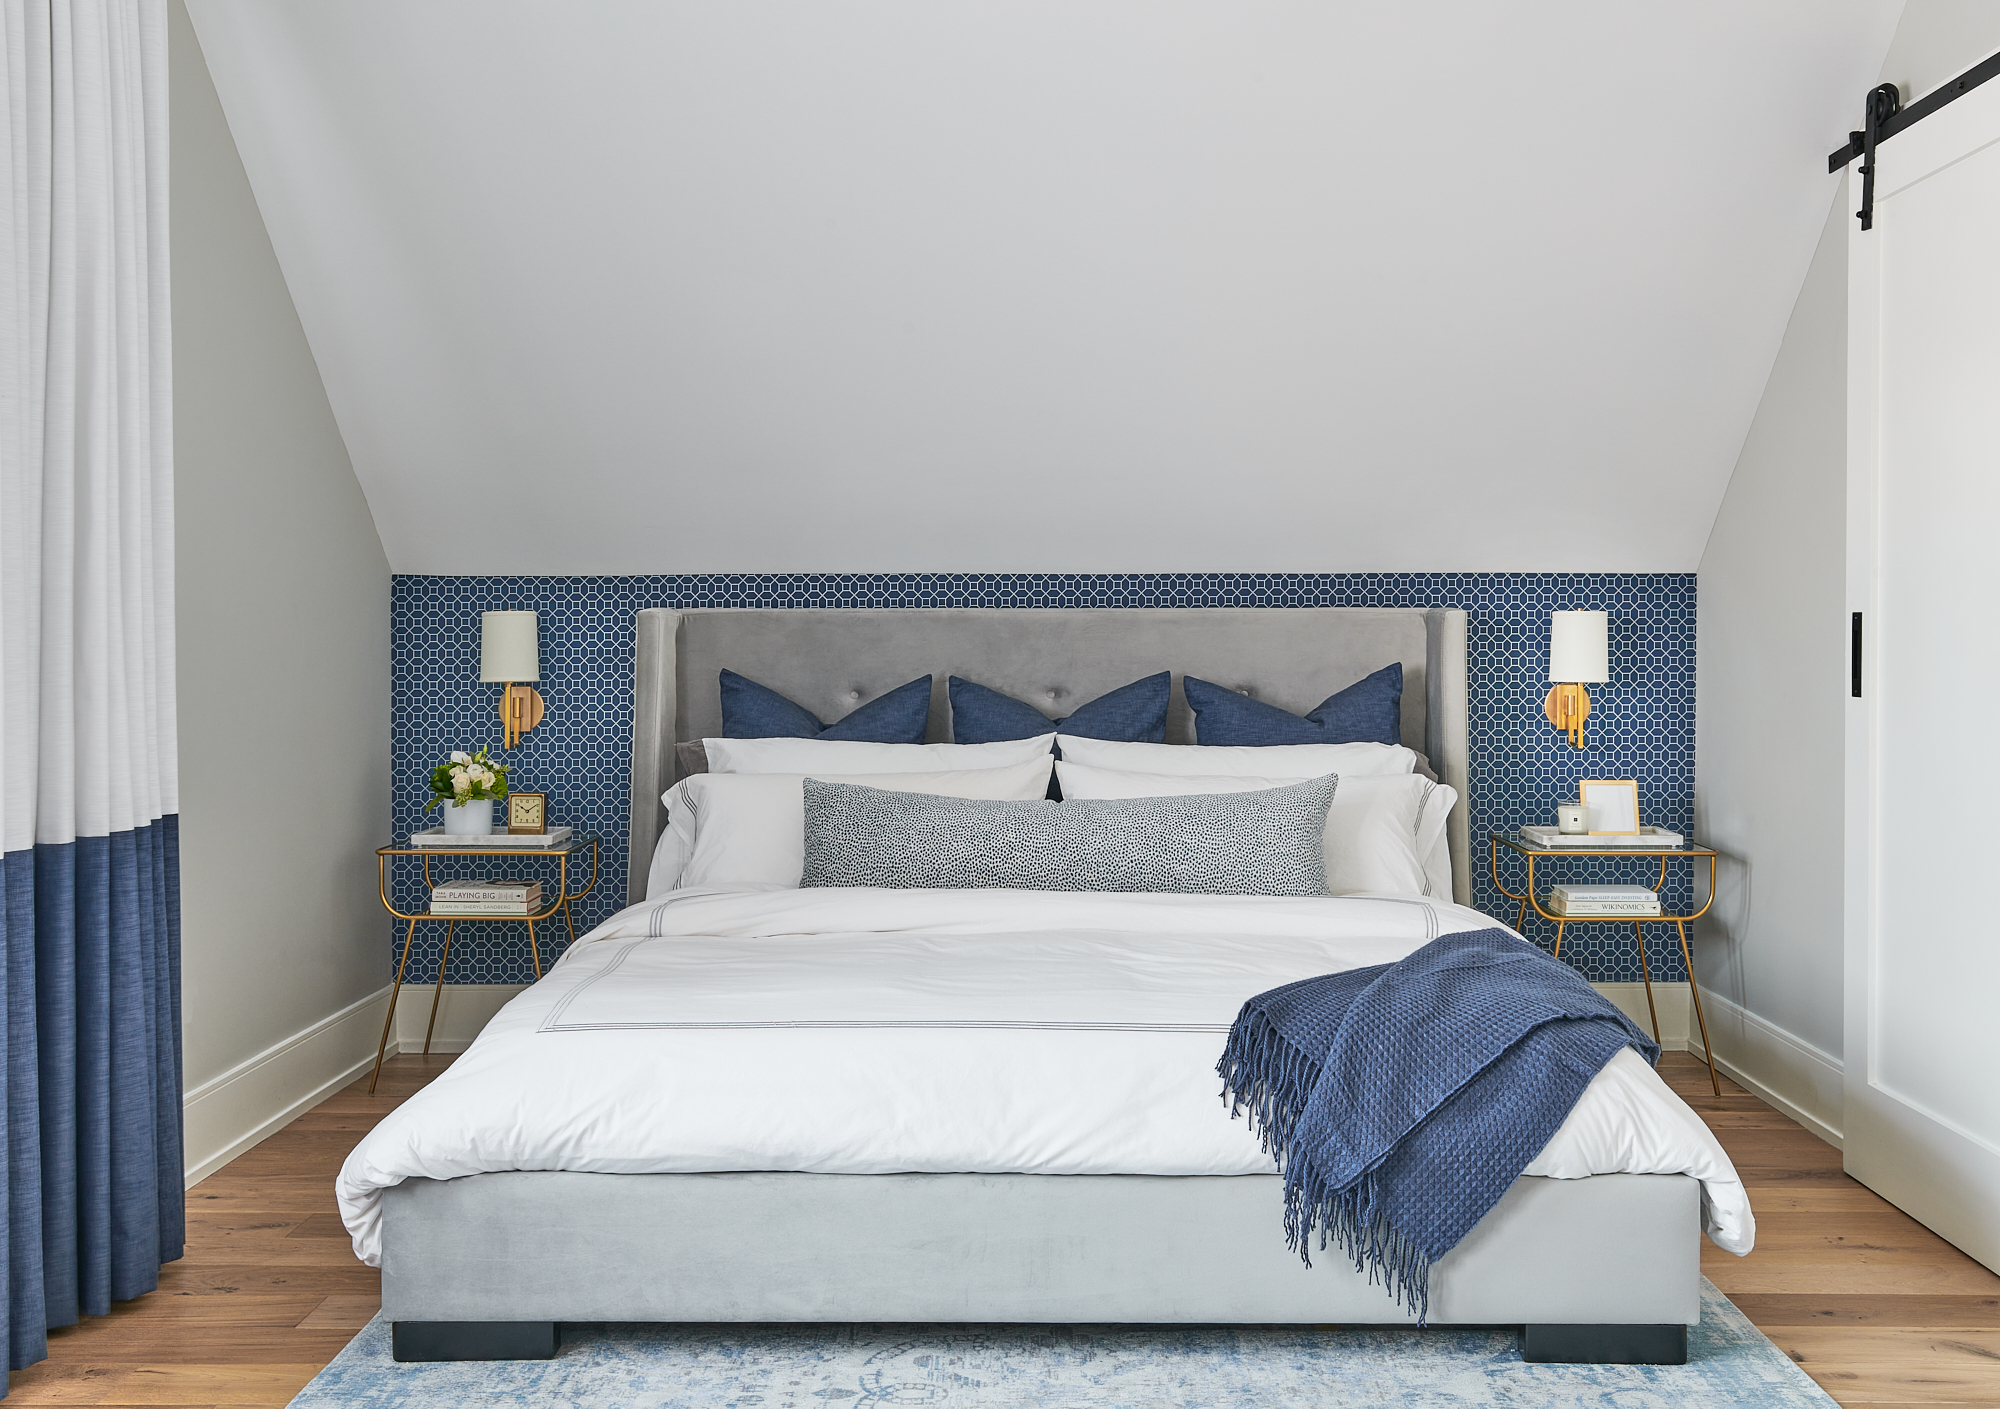 beautiful bedroom with bed styled with blue and white bedding, toss pillows, and throw blanket